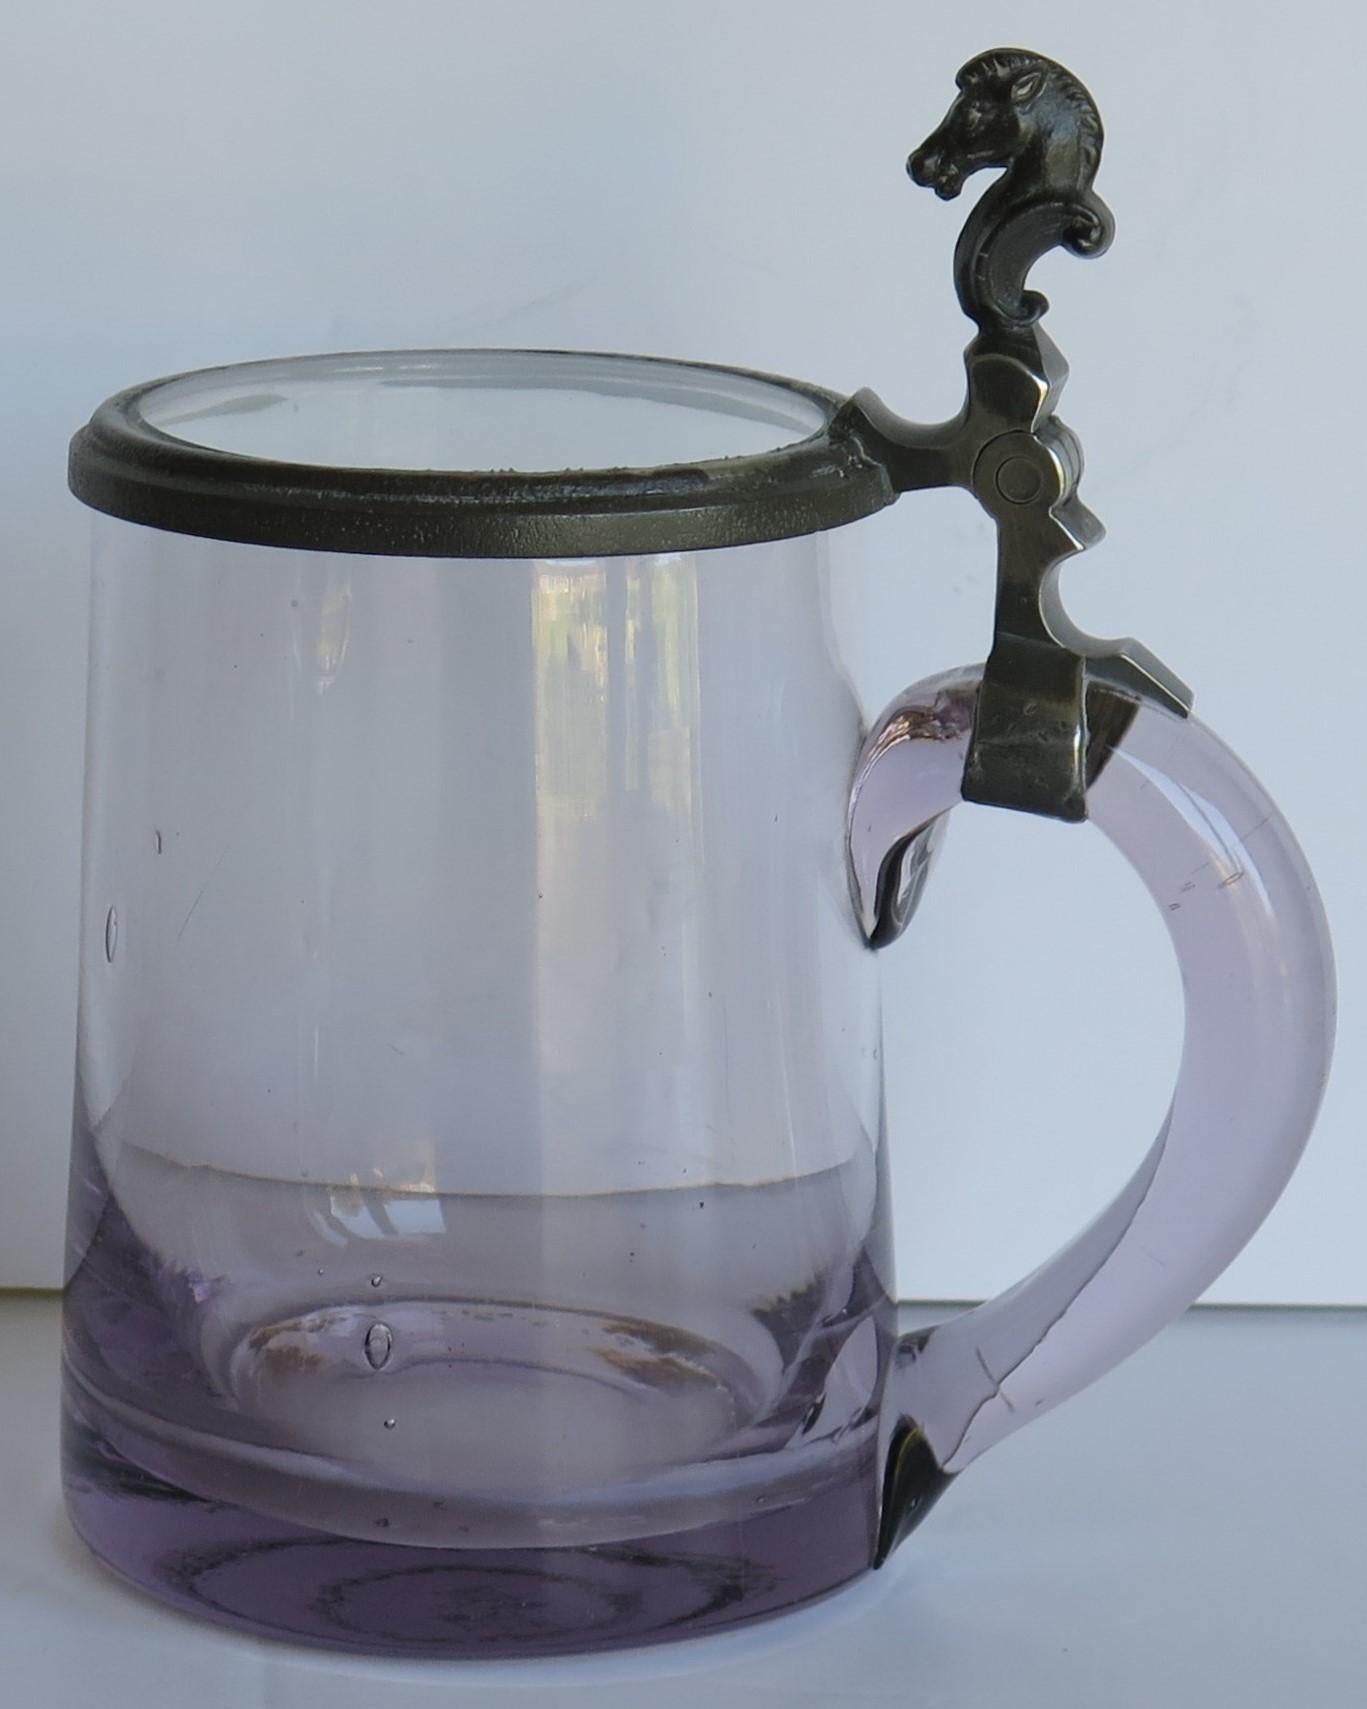 This is a good quality hand blown glass tankard with a hinged cover or lid having a pewter horse head thumb piece, crafted in the mid-19th Century.

The tankard has a cylindrical slightly tapered body which is made of hand blown glass with a good